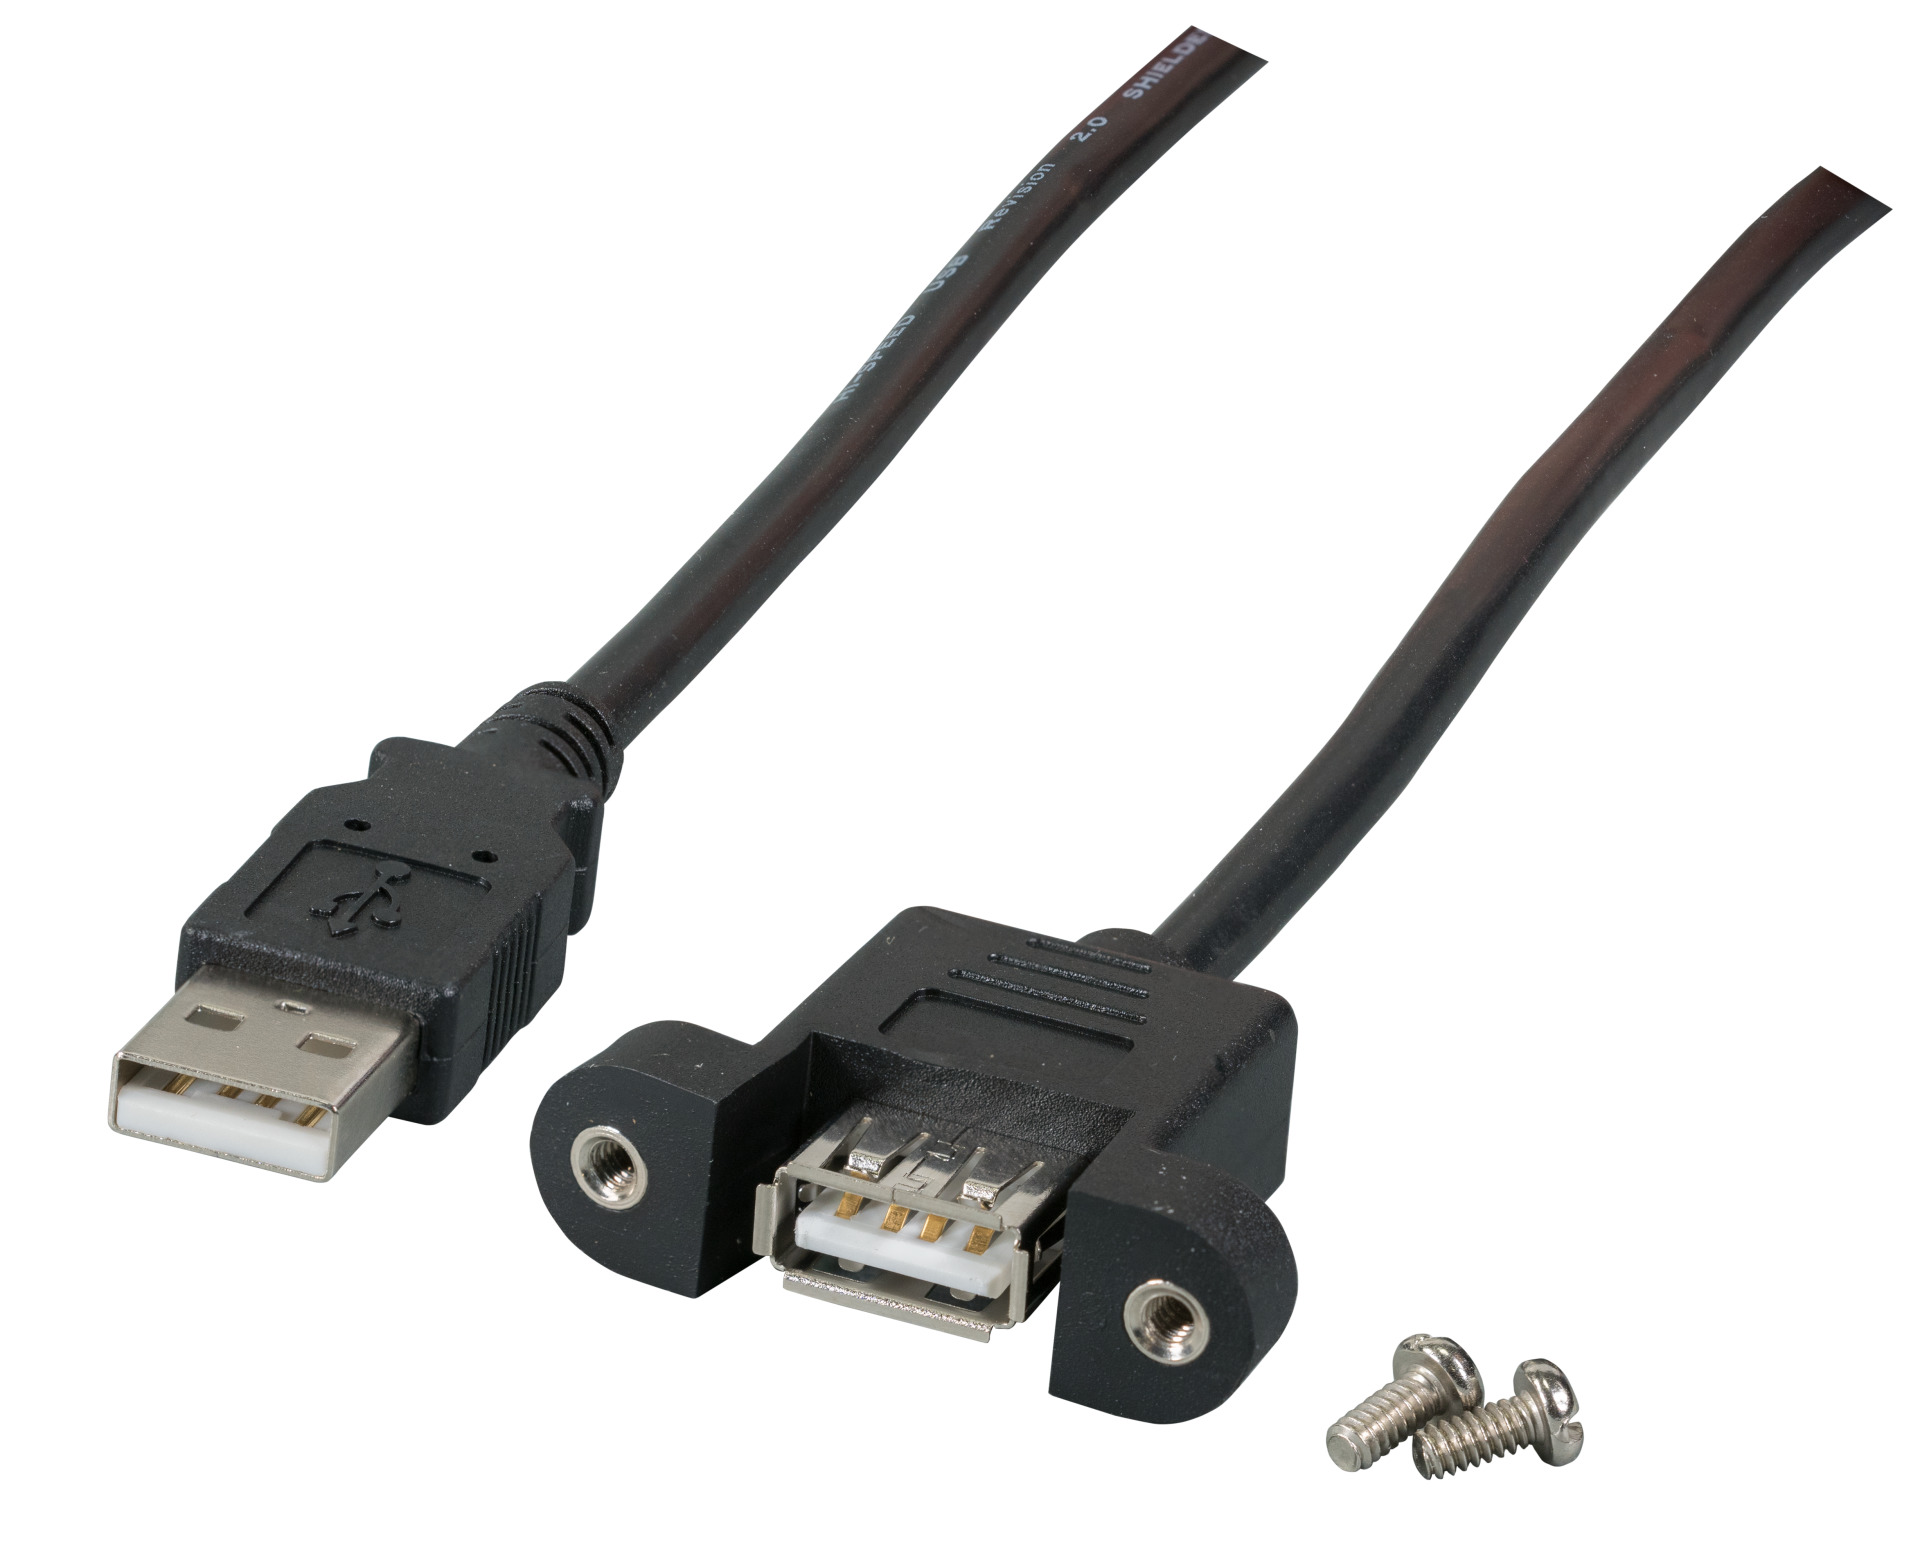 USB2.0 Extension Cable A-A, M-F (panel type), 1.8 m black, Classic